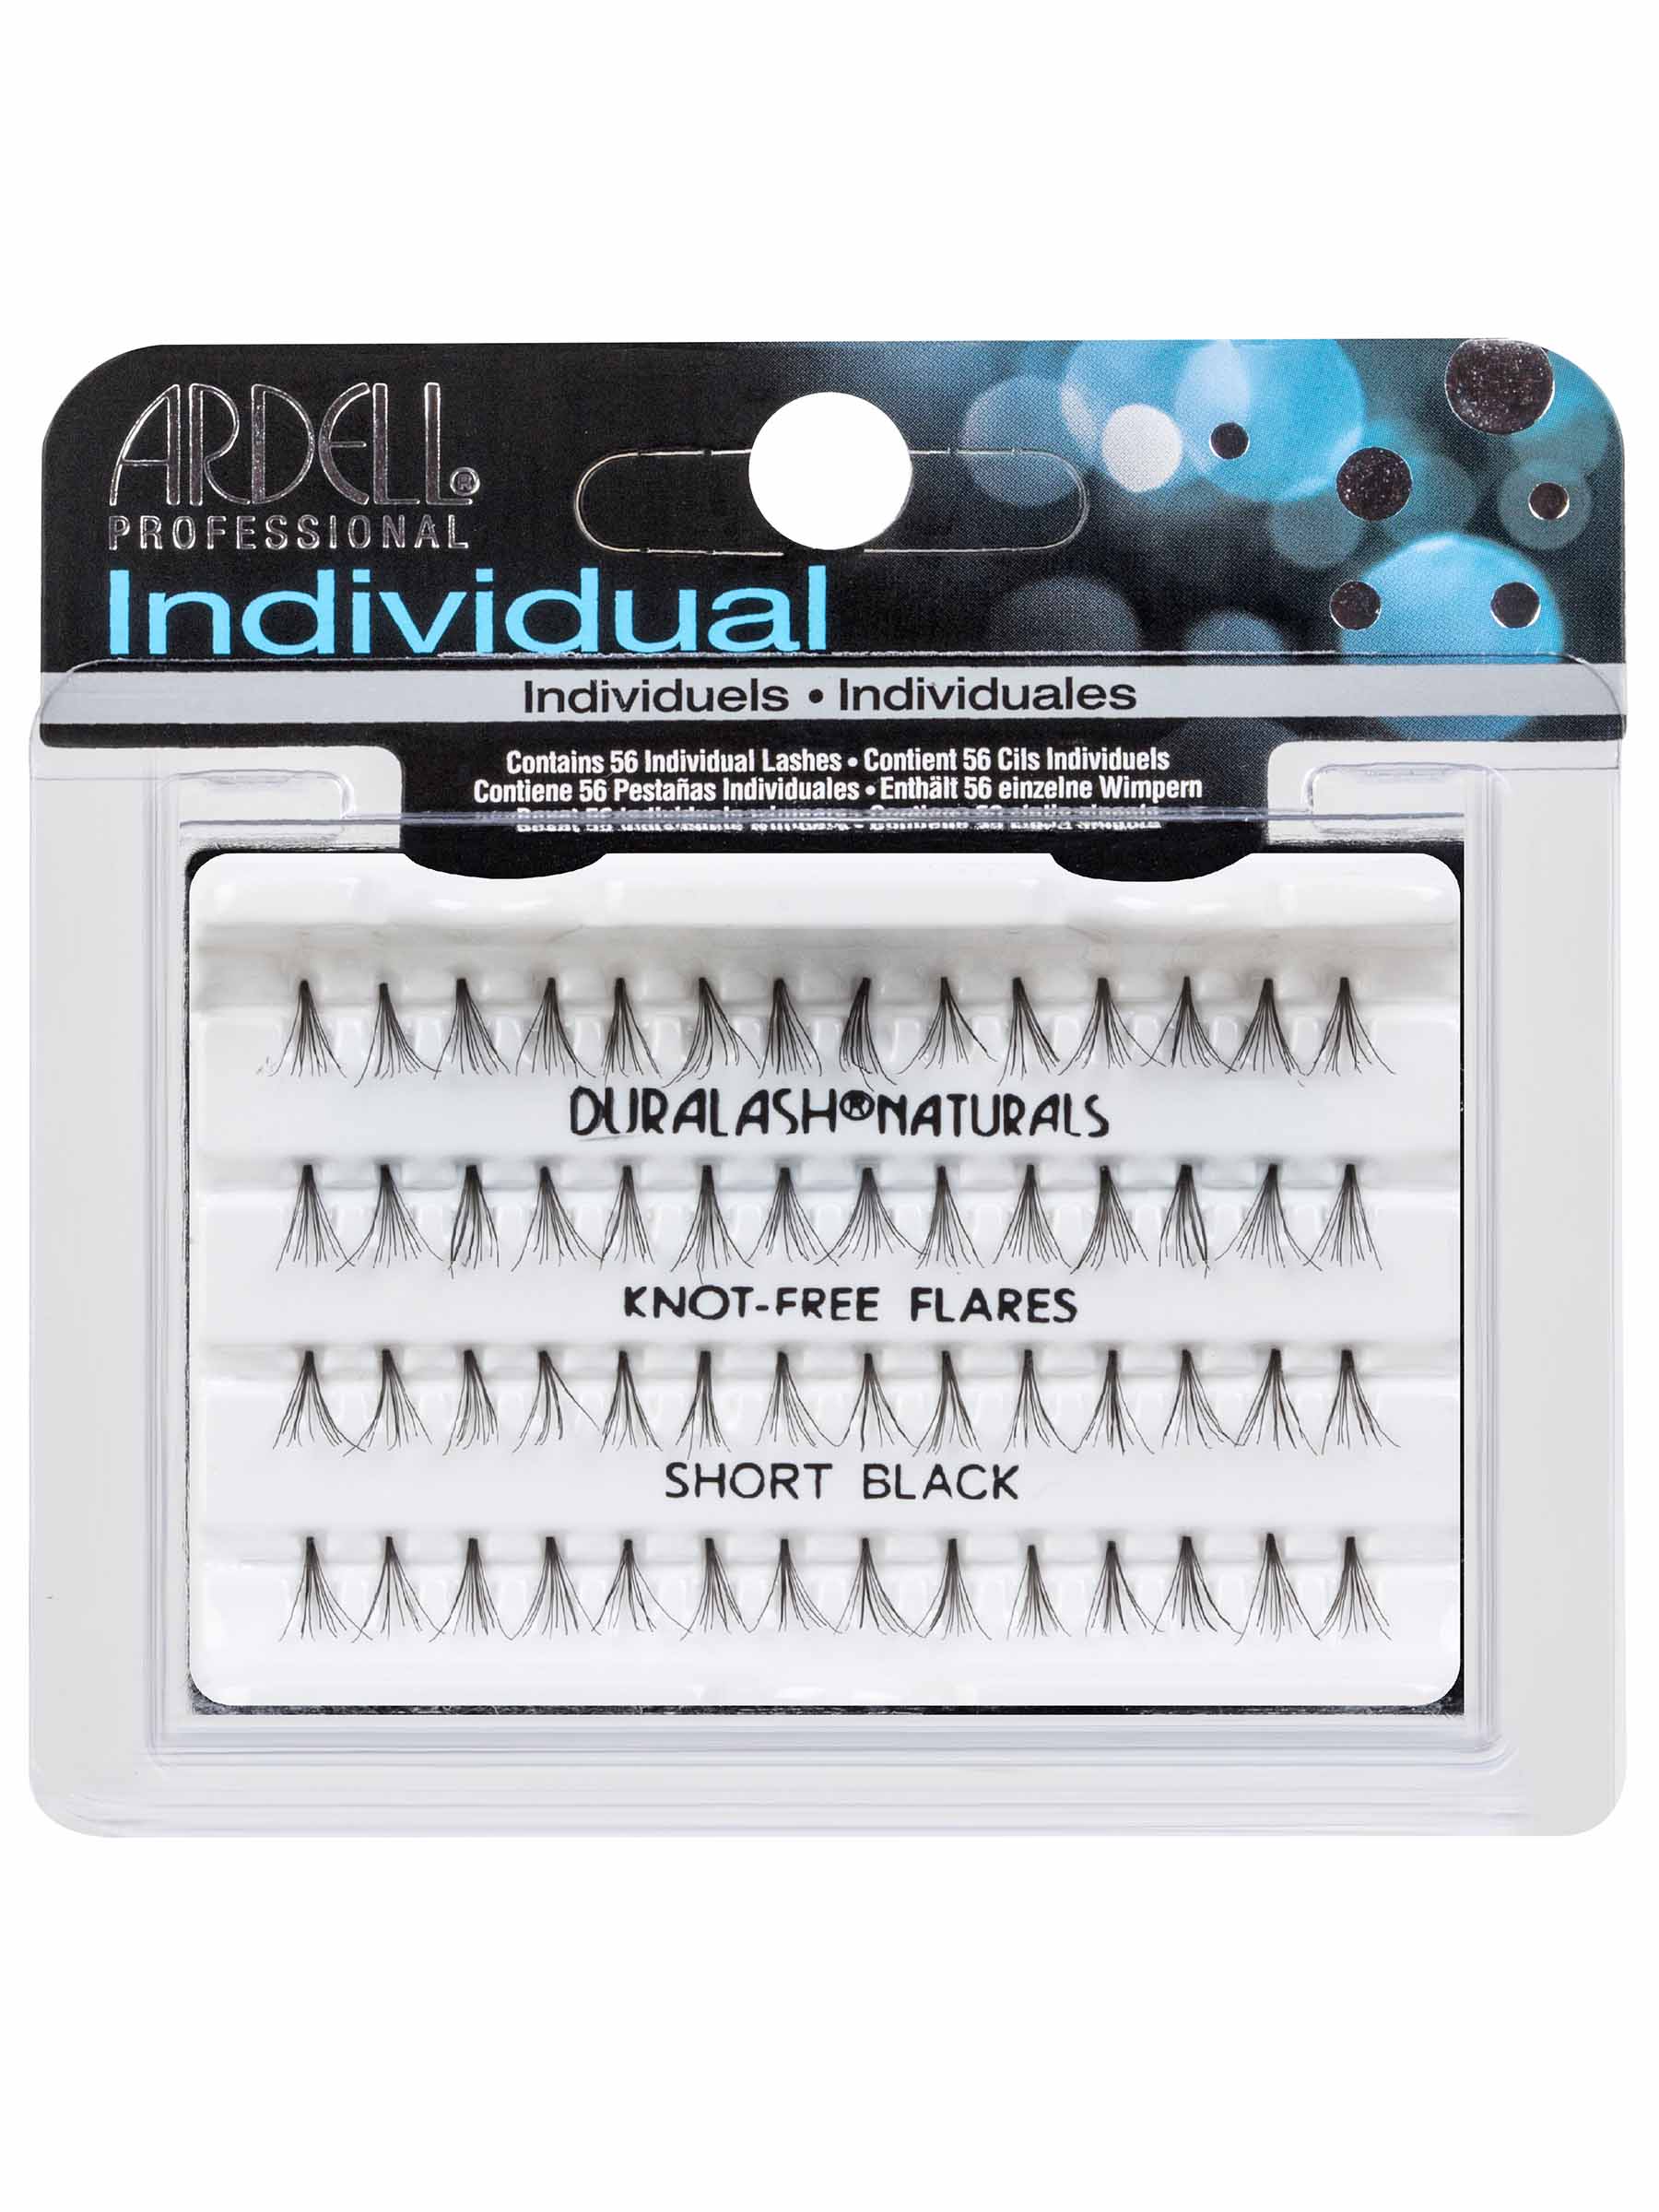 Пучки ресниц ARDELL Duralash Naturals Knot-Free Flairs Short Black накладные ресницы ardell duralash naturals knot free flairs combo pack